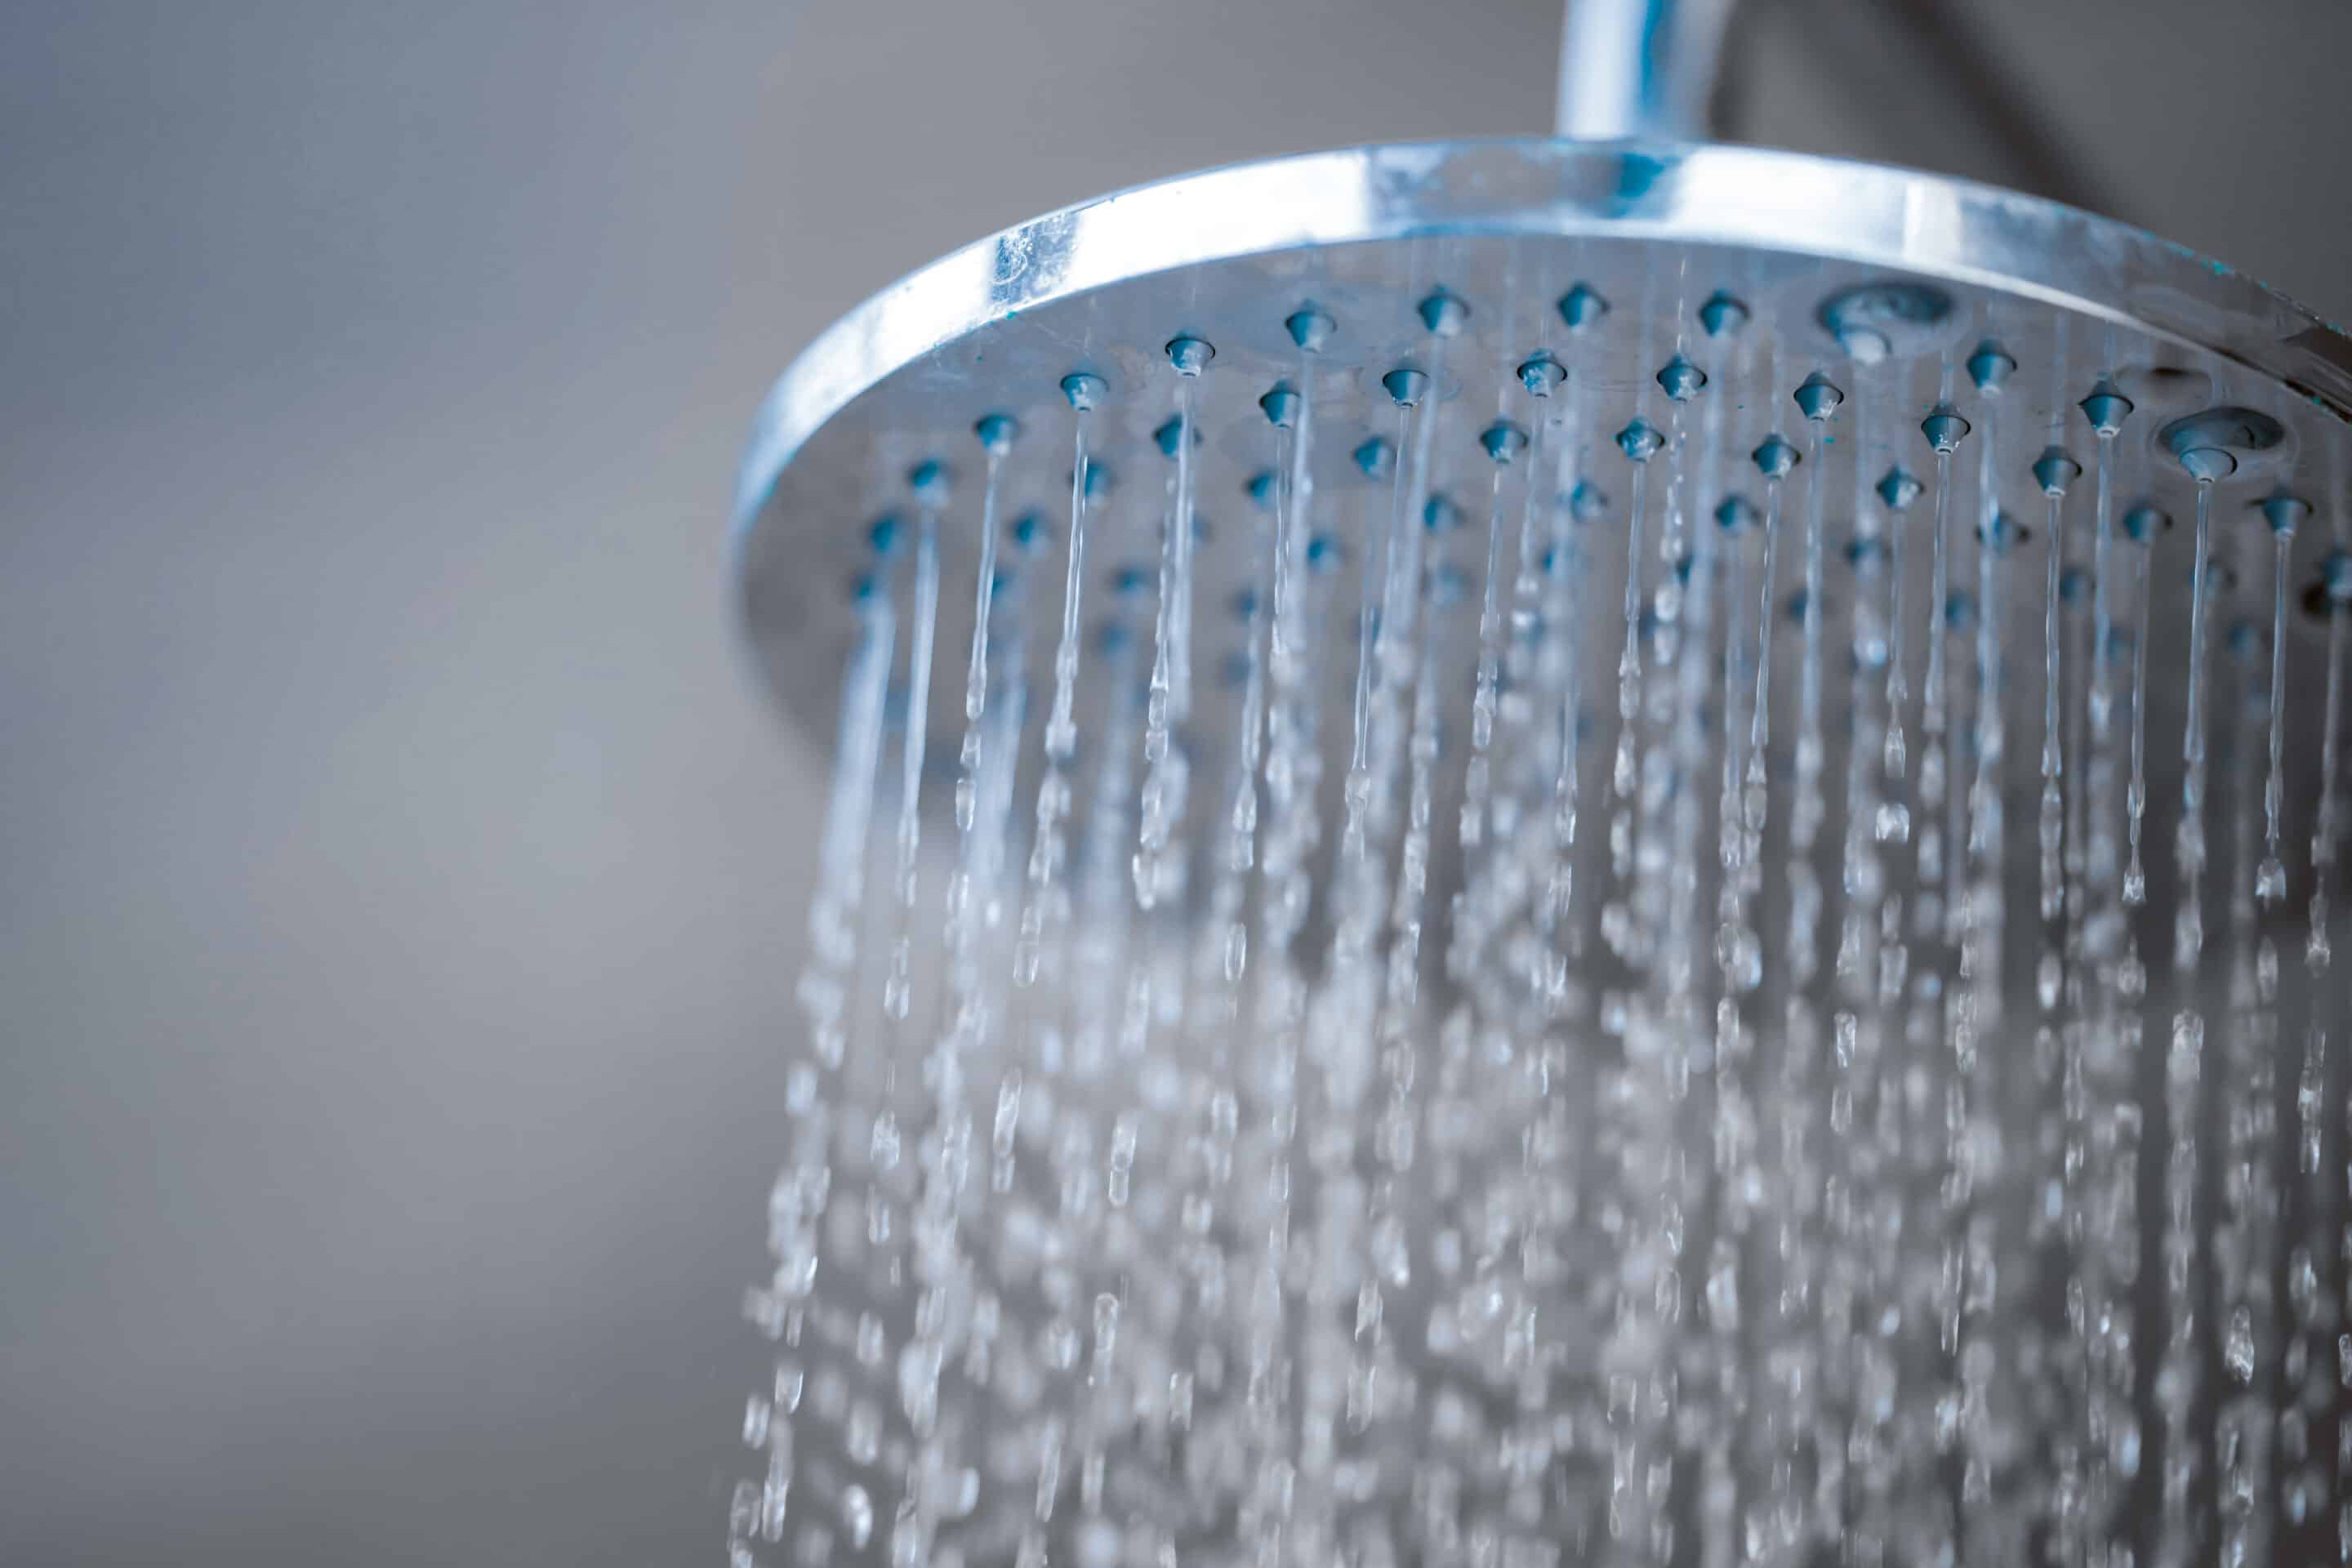 Benefits of Cold Showers for Fighting Addiction